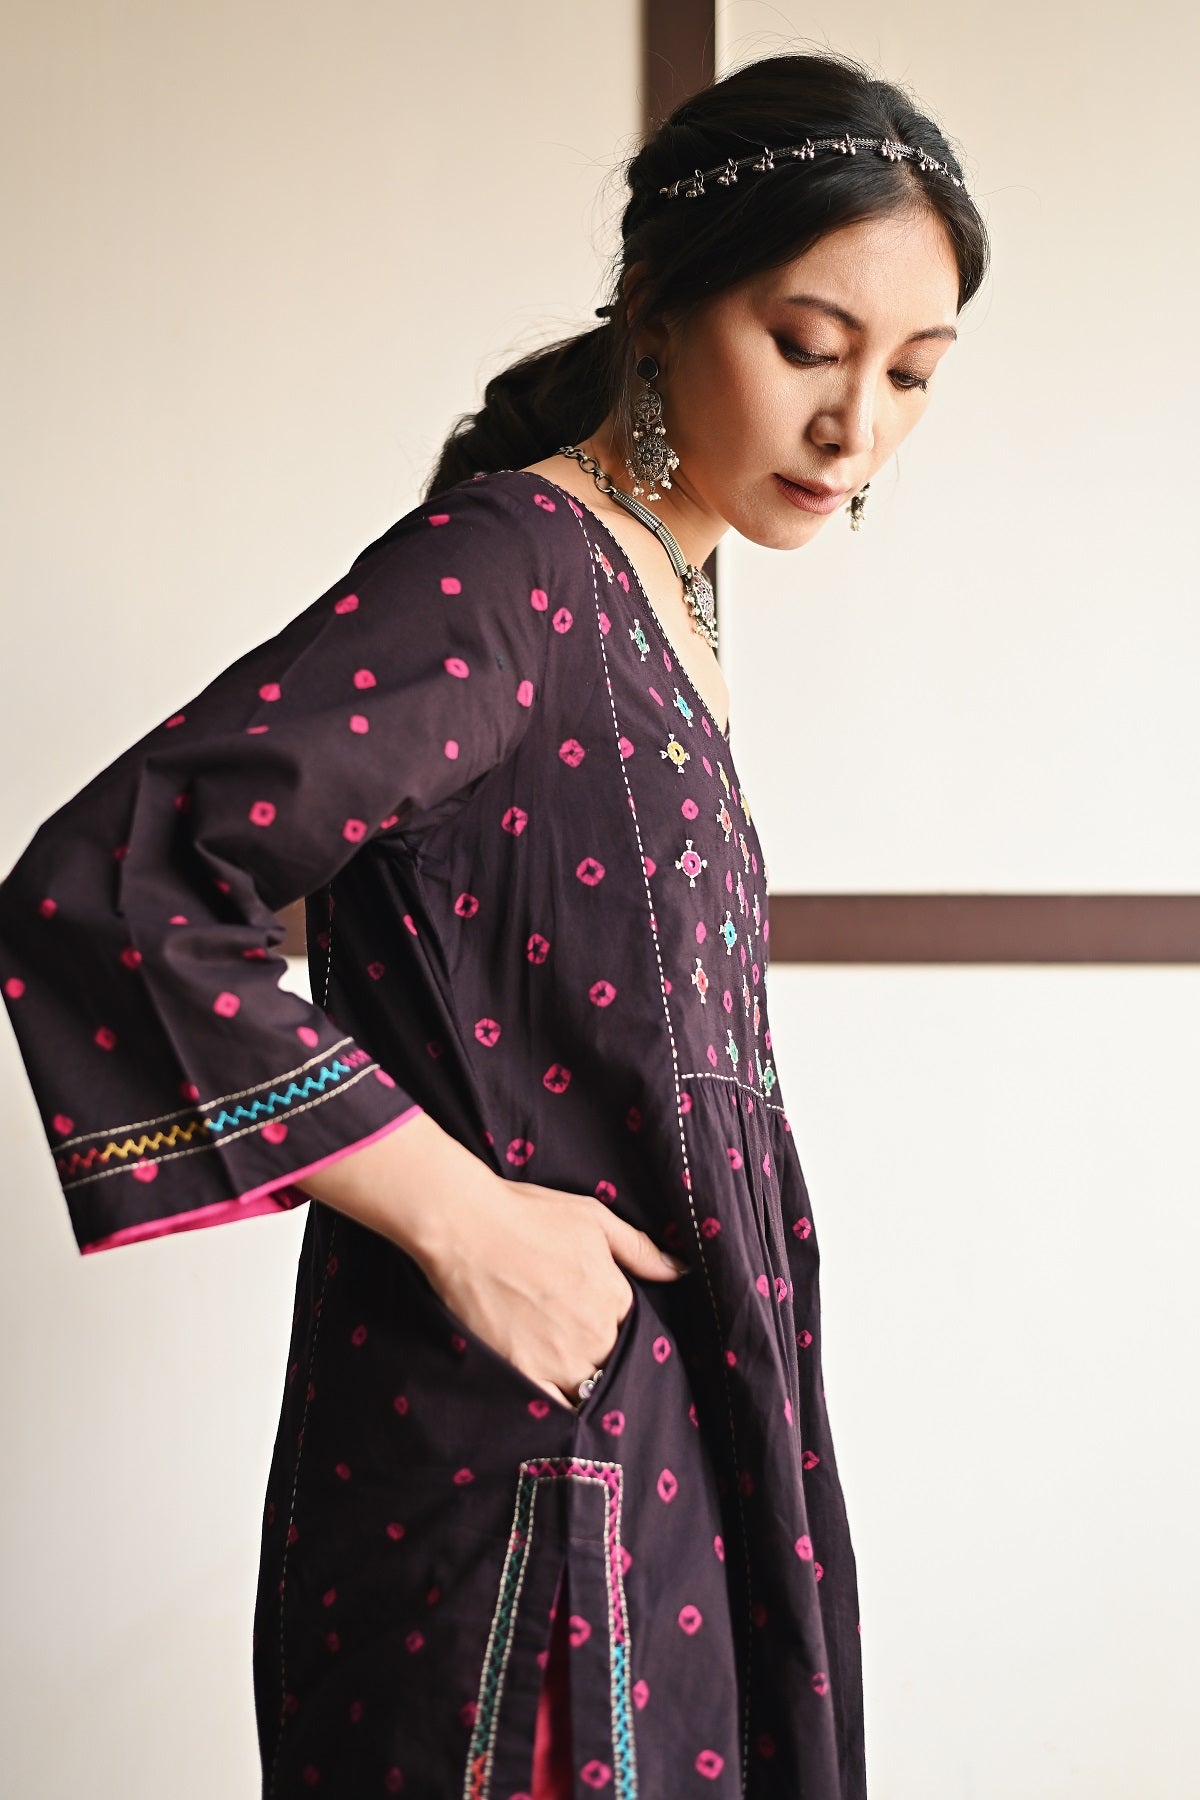 Kaanch Round Neck Bandhej And Embroidered Black Kurta